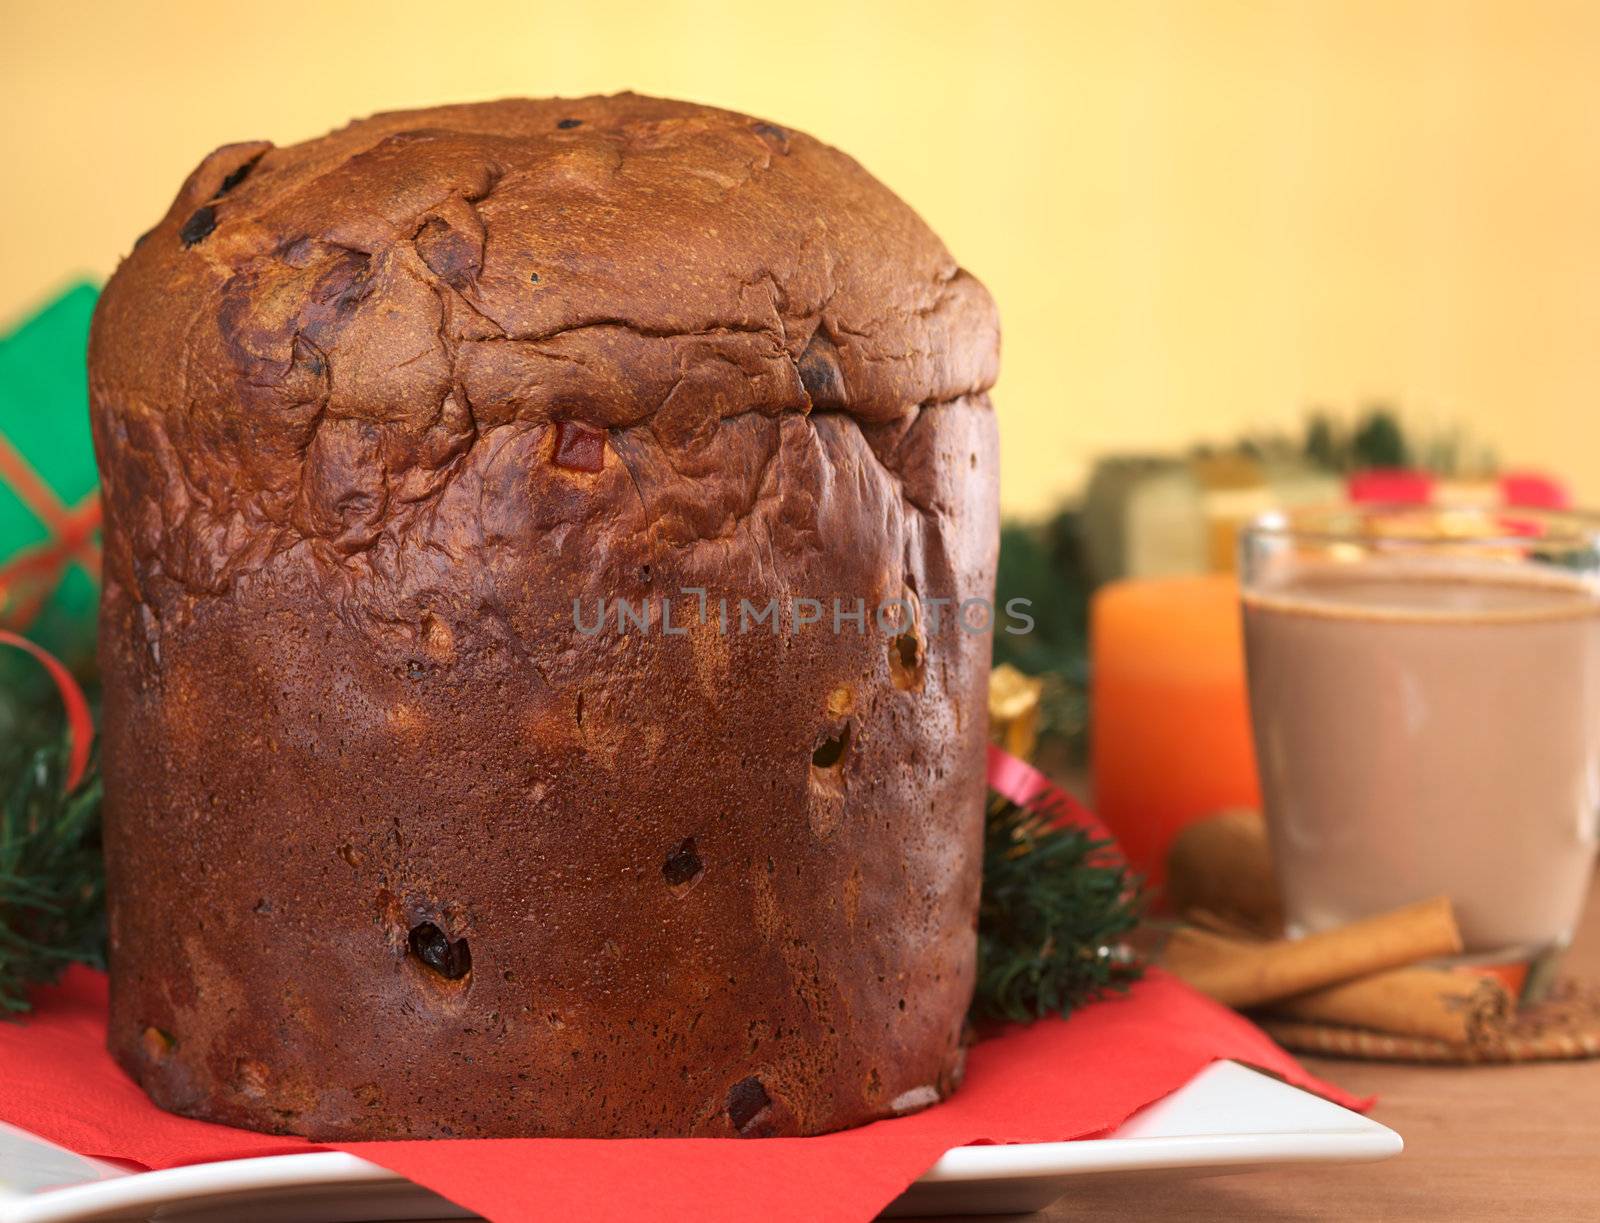 Panettone is a traditional Christmas cake, which is originally from Italy, but is enjoyed now also in many South American countries (Selective Focus, Focus on the front of the cake) 